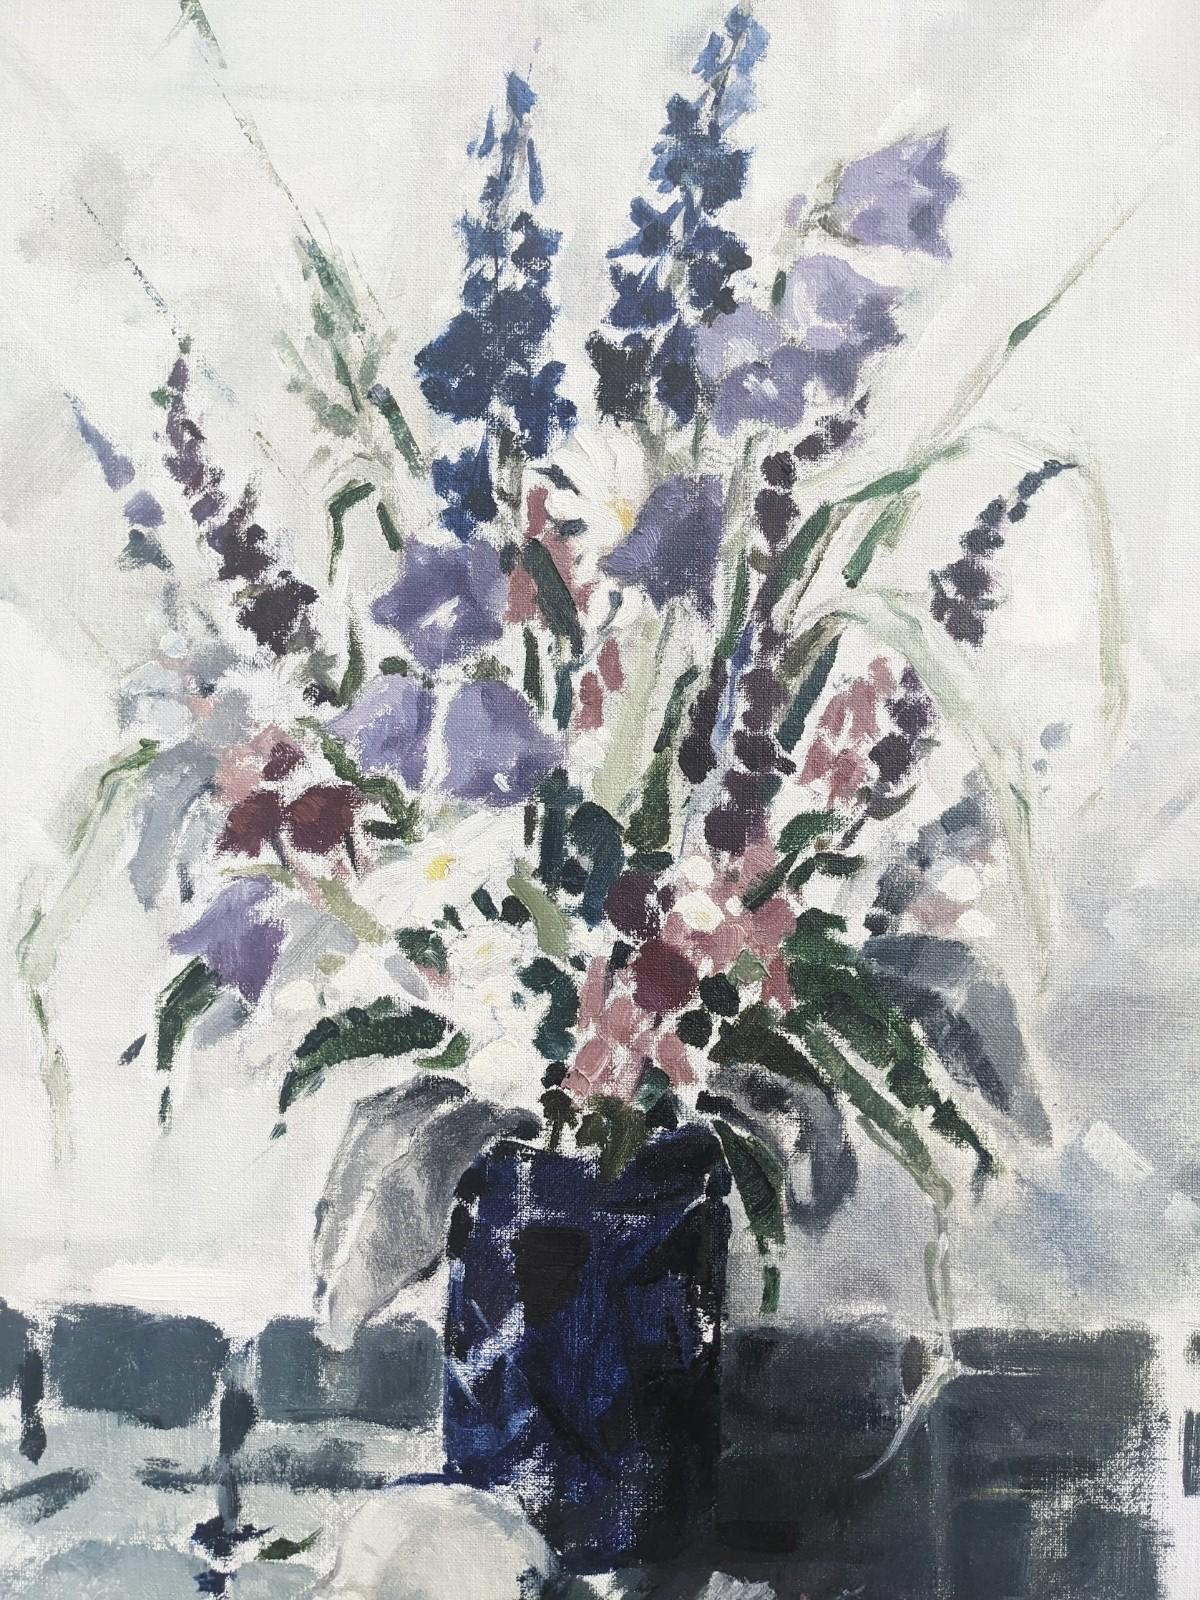 Flowers & Shell
Size: 66.5 x 48.5 cm (including frame)
Oil on canvas

A tall floral composition in oil, painted in 1983.

A delightful bunch of purple, pink, dark red and white flowers sit within a striking azure blue vase, with a white shell lying